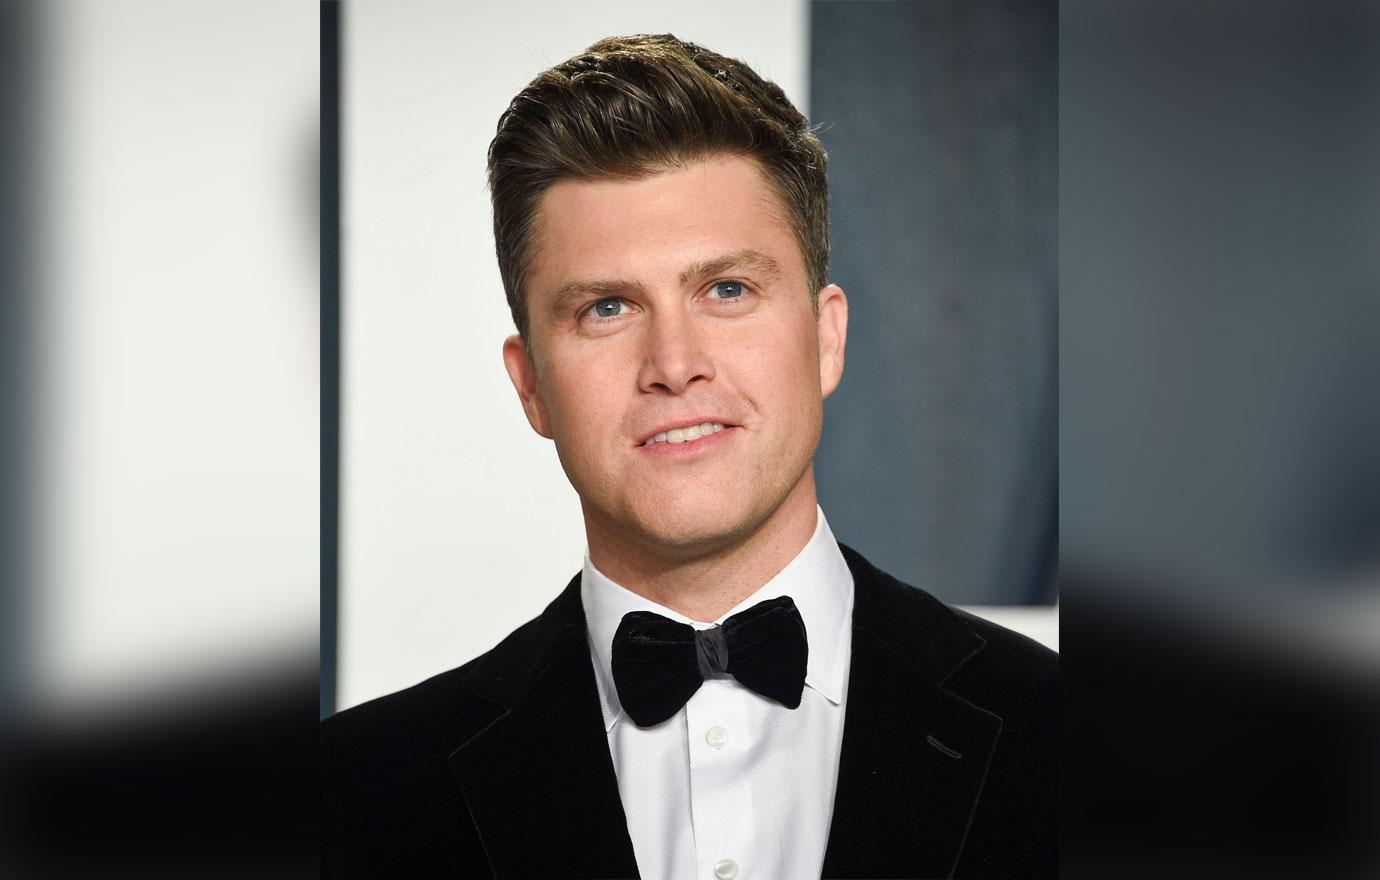 Colin Jost Preparing To Leave ‘Saturday Night Live’ After 15 Years